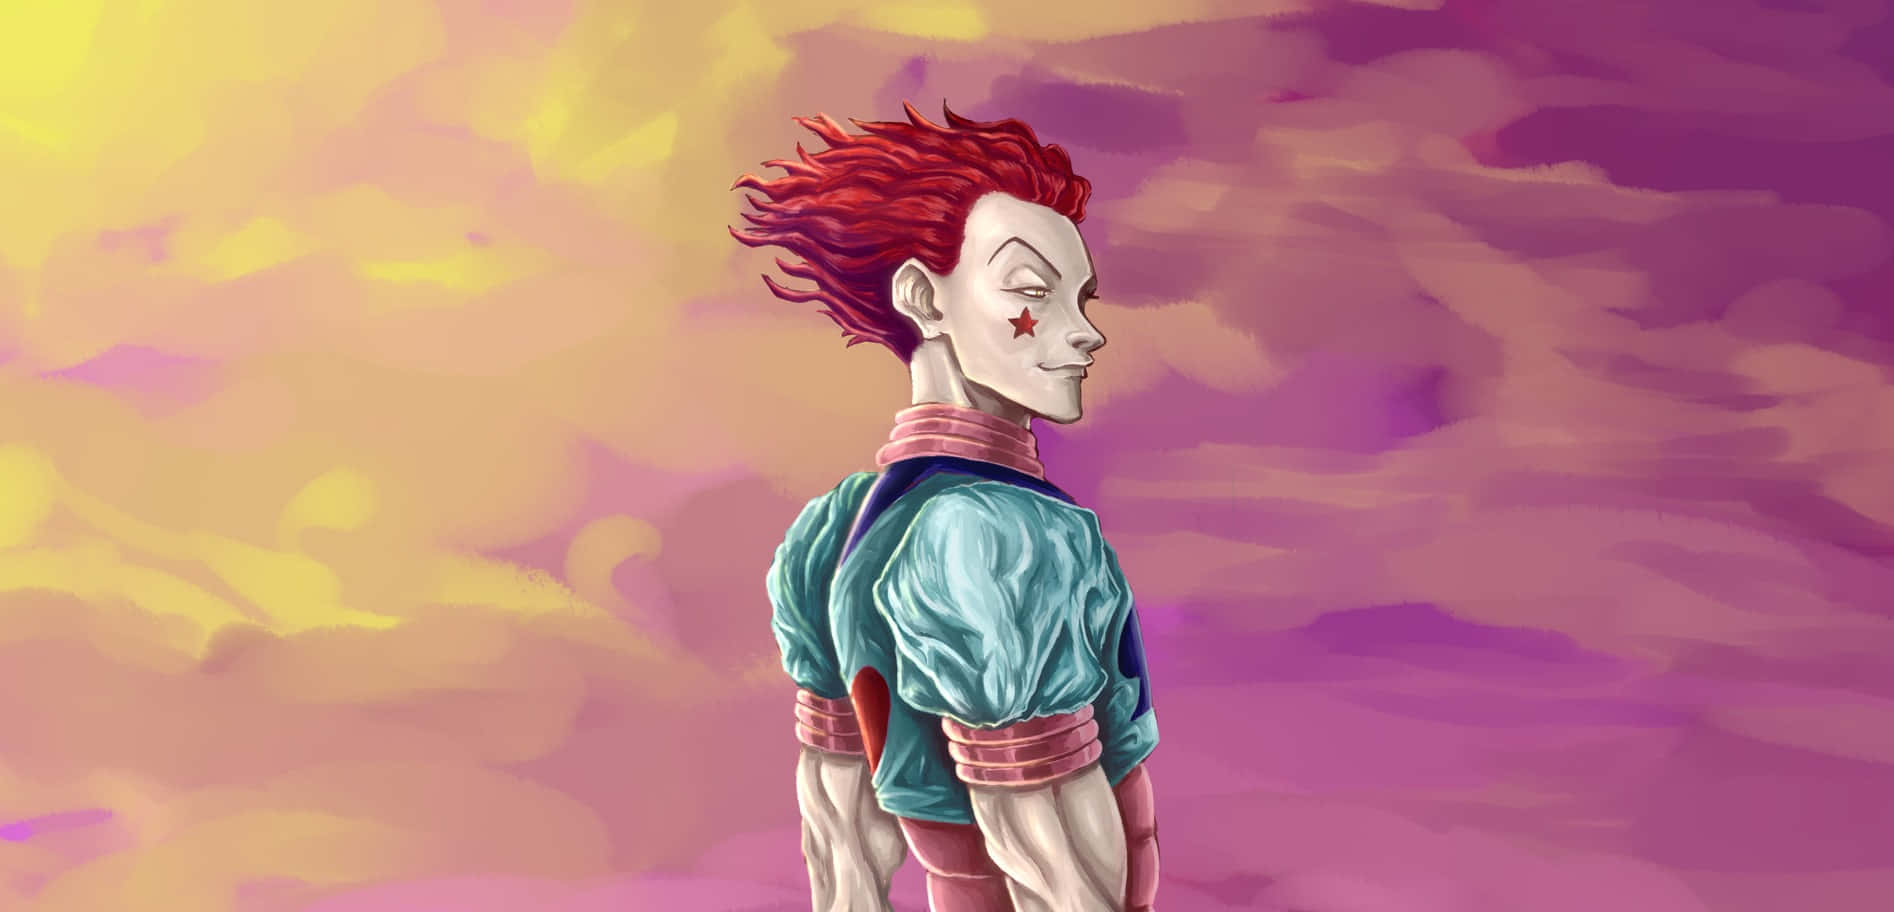 Hisoka Gains the Upper Hand with His Spectacular Acts of Magic